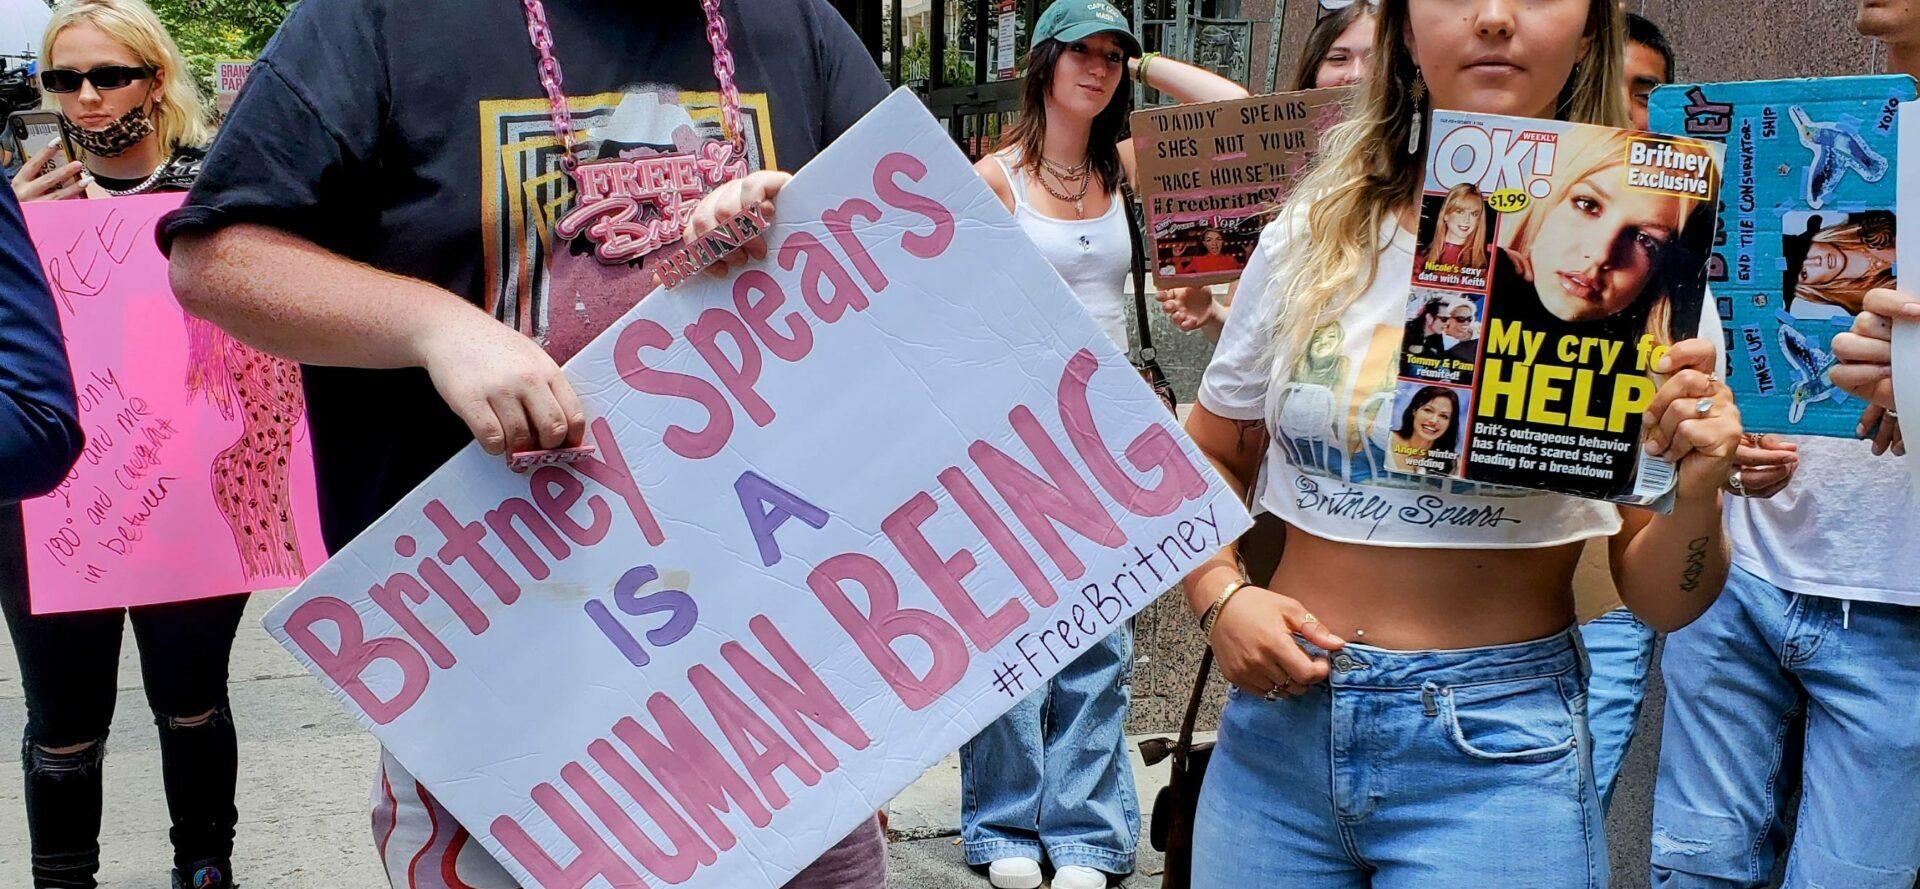 Fans and protesters rally to support the Britney Spears conservatorship trial